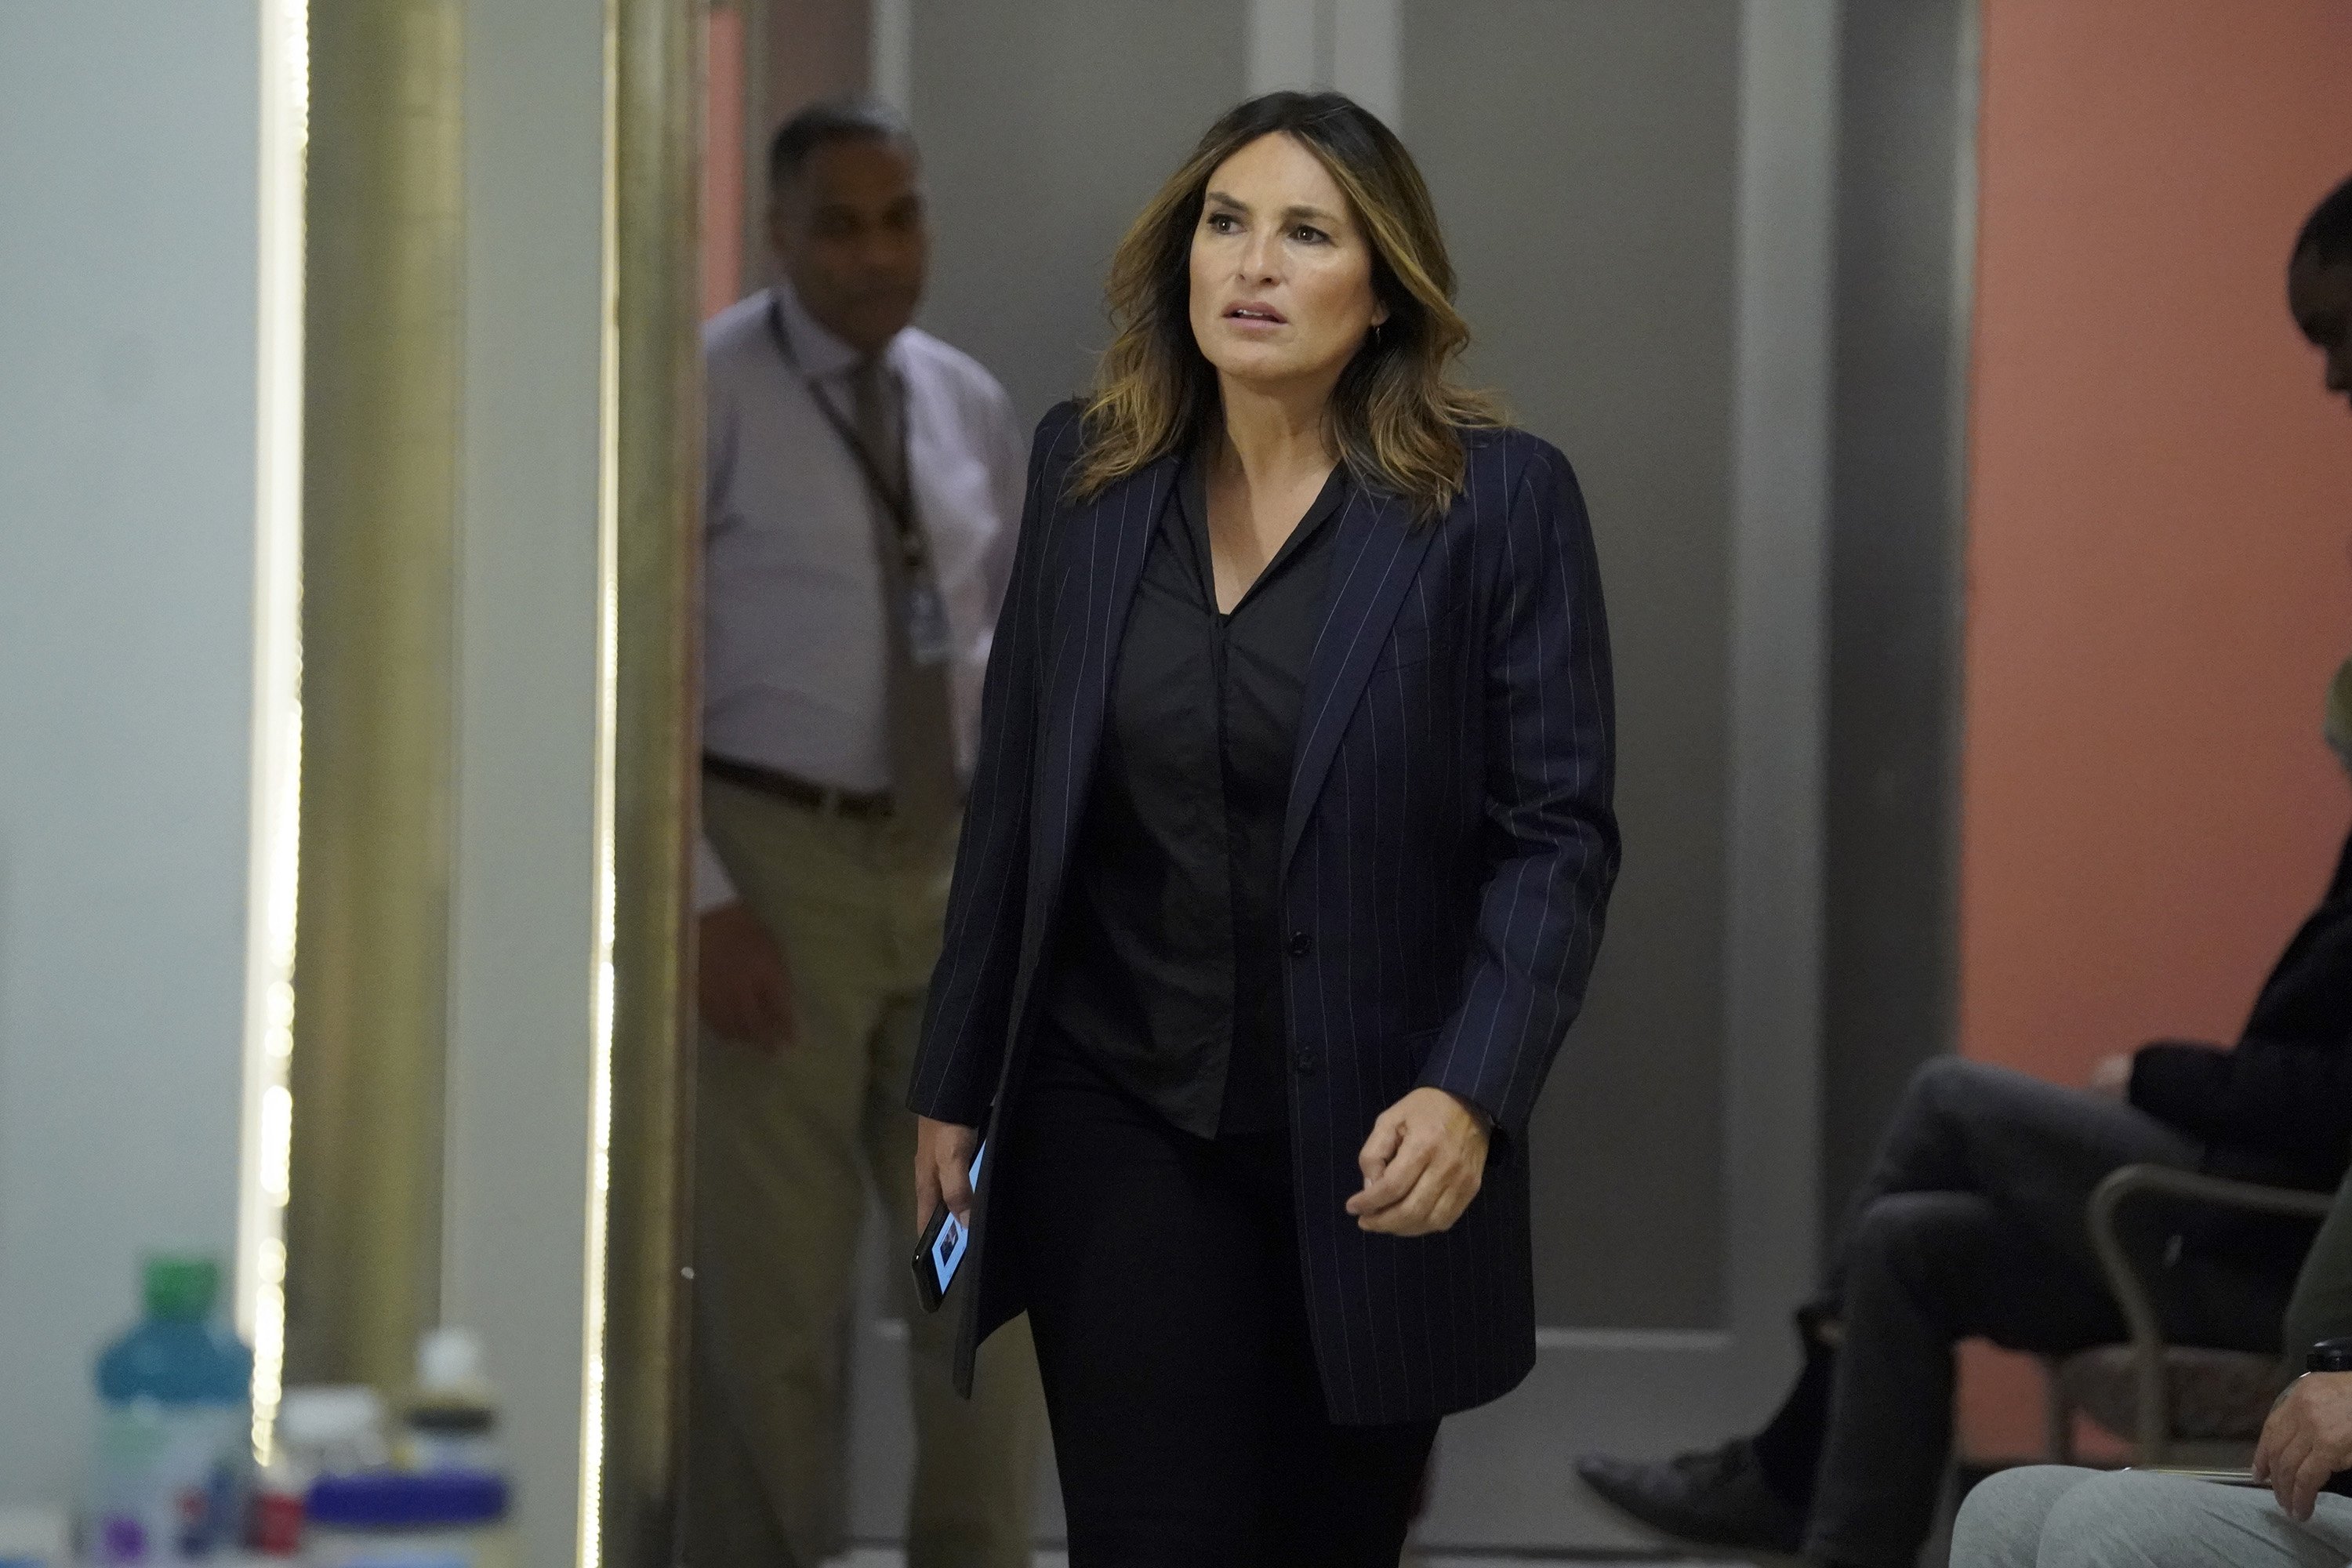 Mariska Hargitay on set of "Law & Order: SVU" episode titled "Eternal Relief from Pain" in February 6, 2020 | Photo: Getty Images